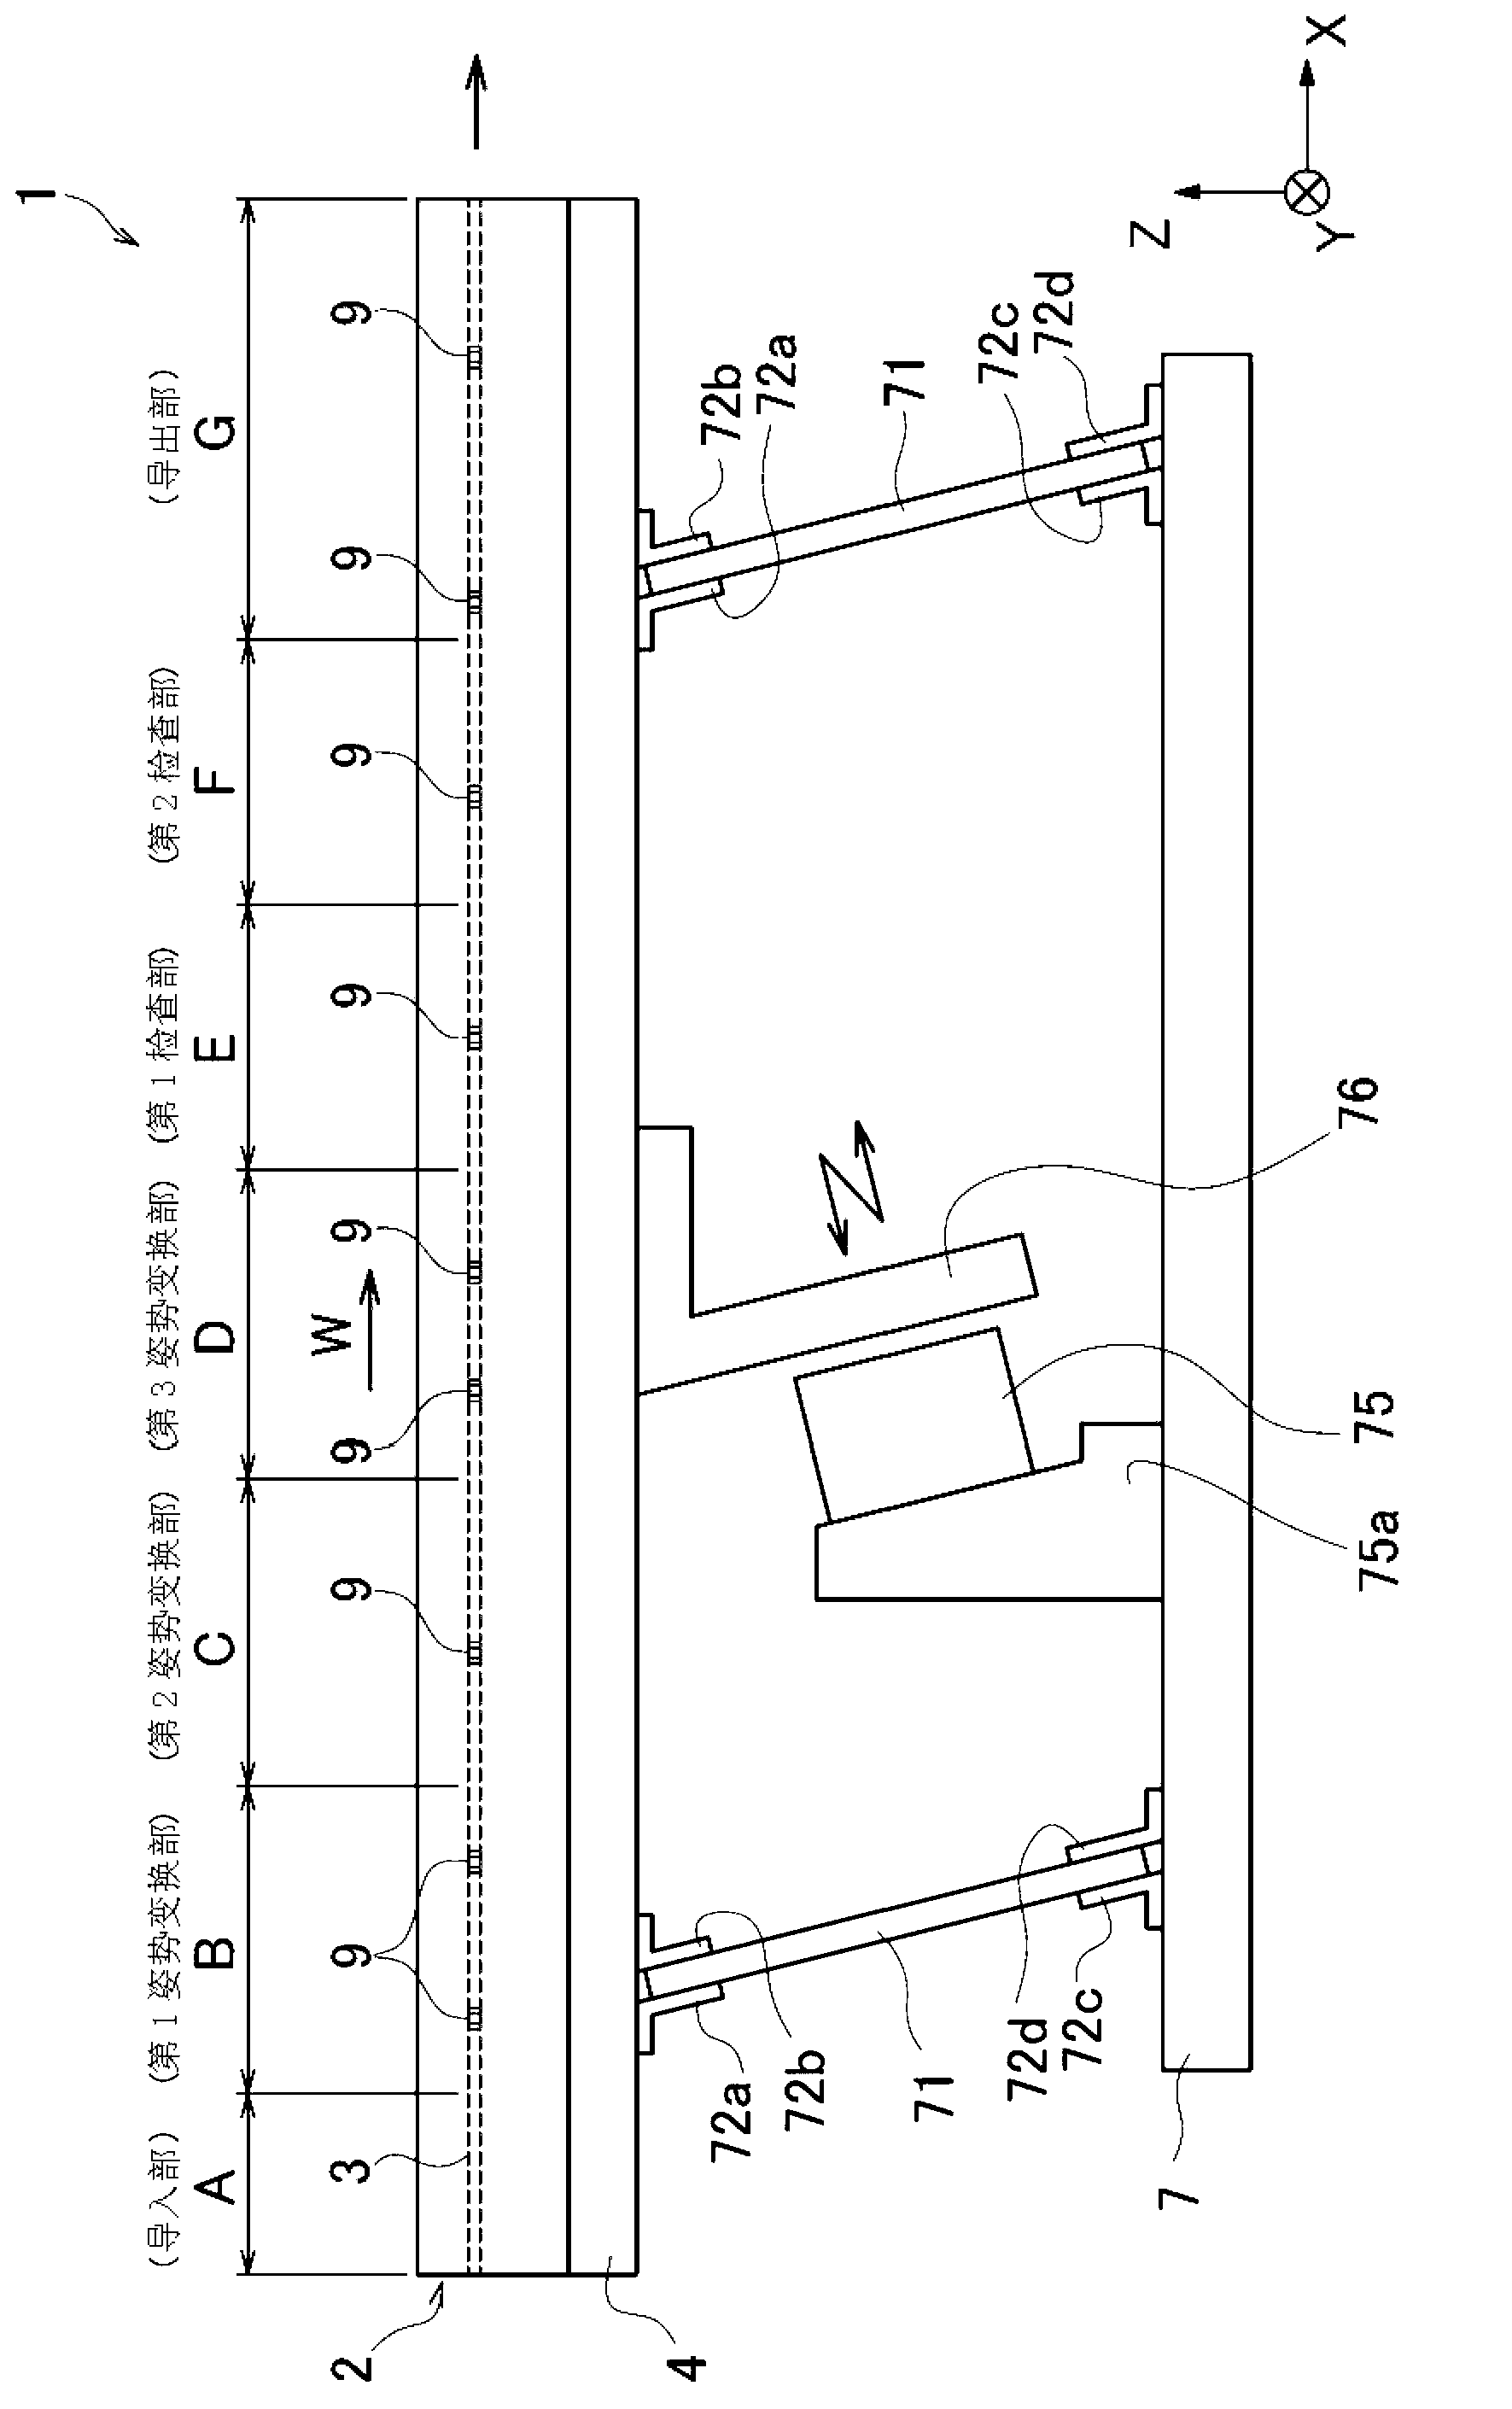 Workpiece aligning and conveying apparatus